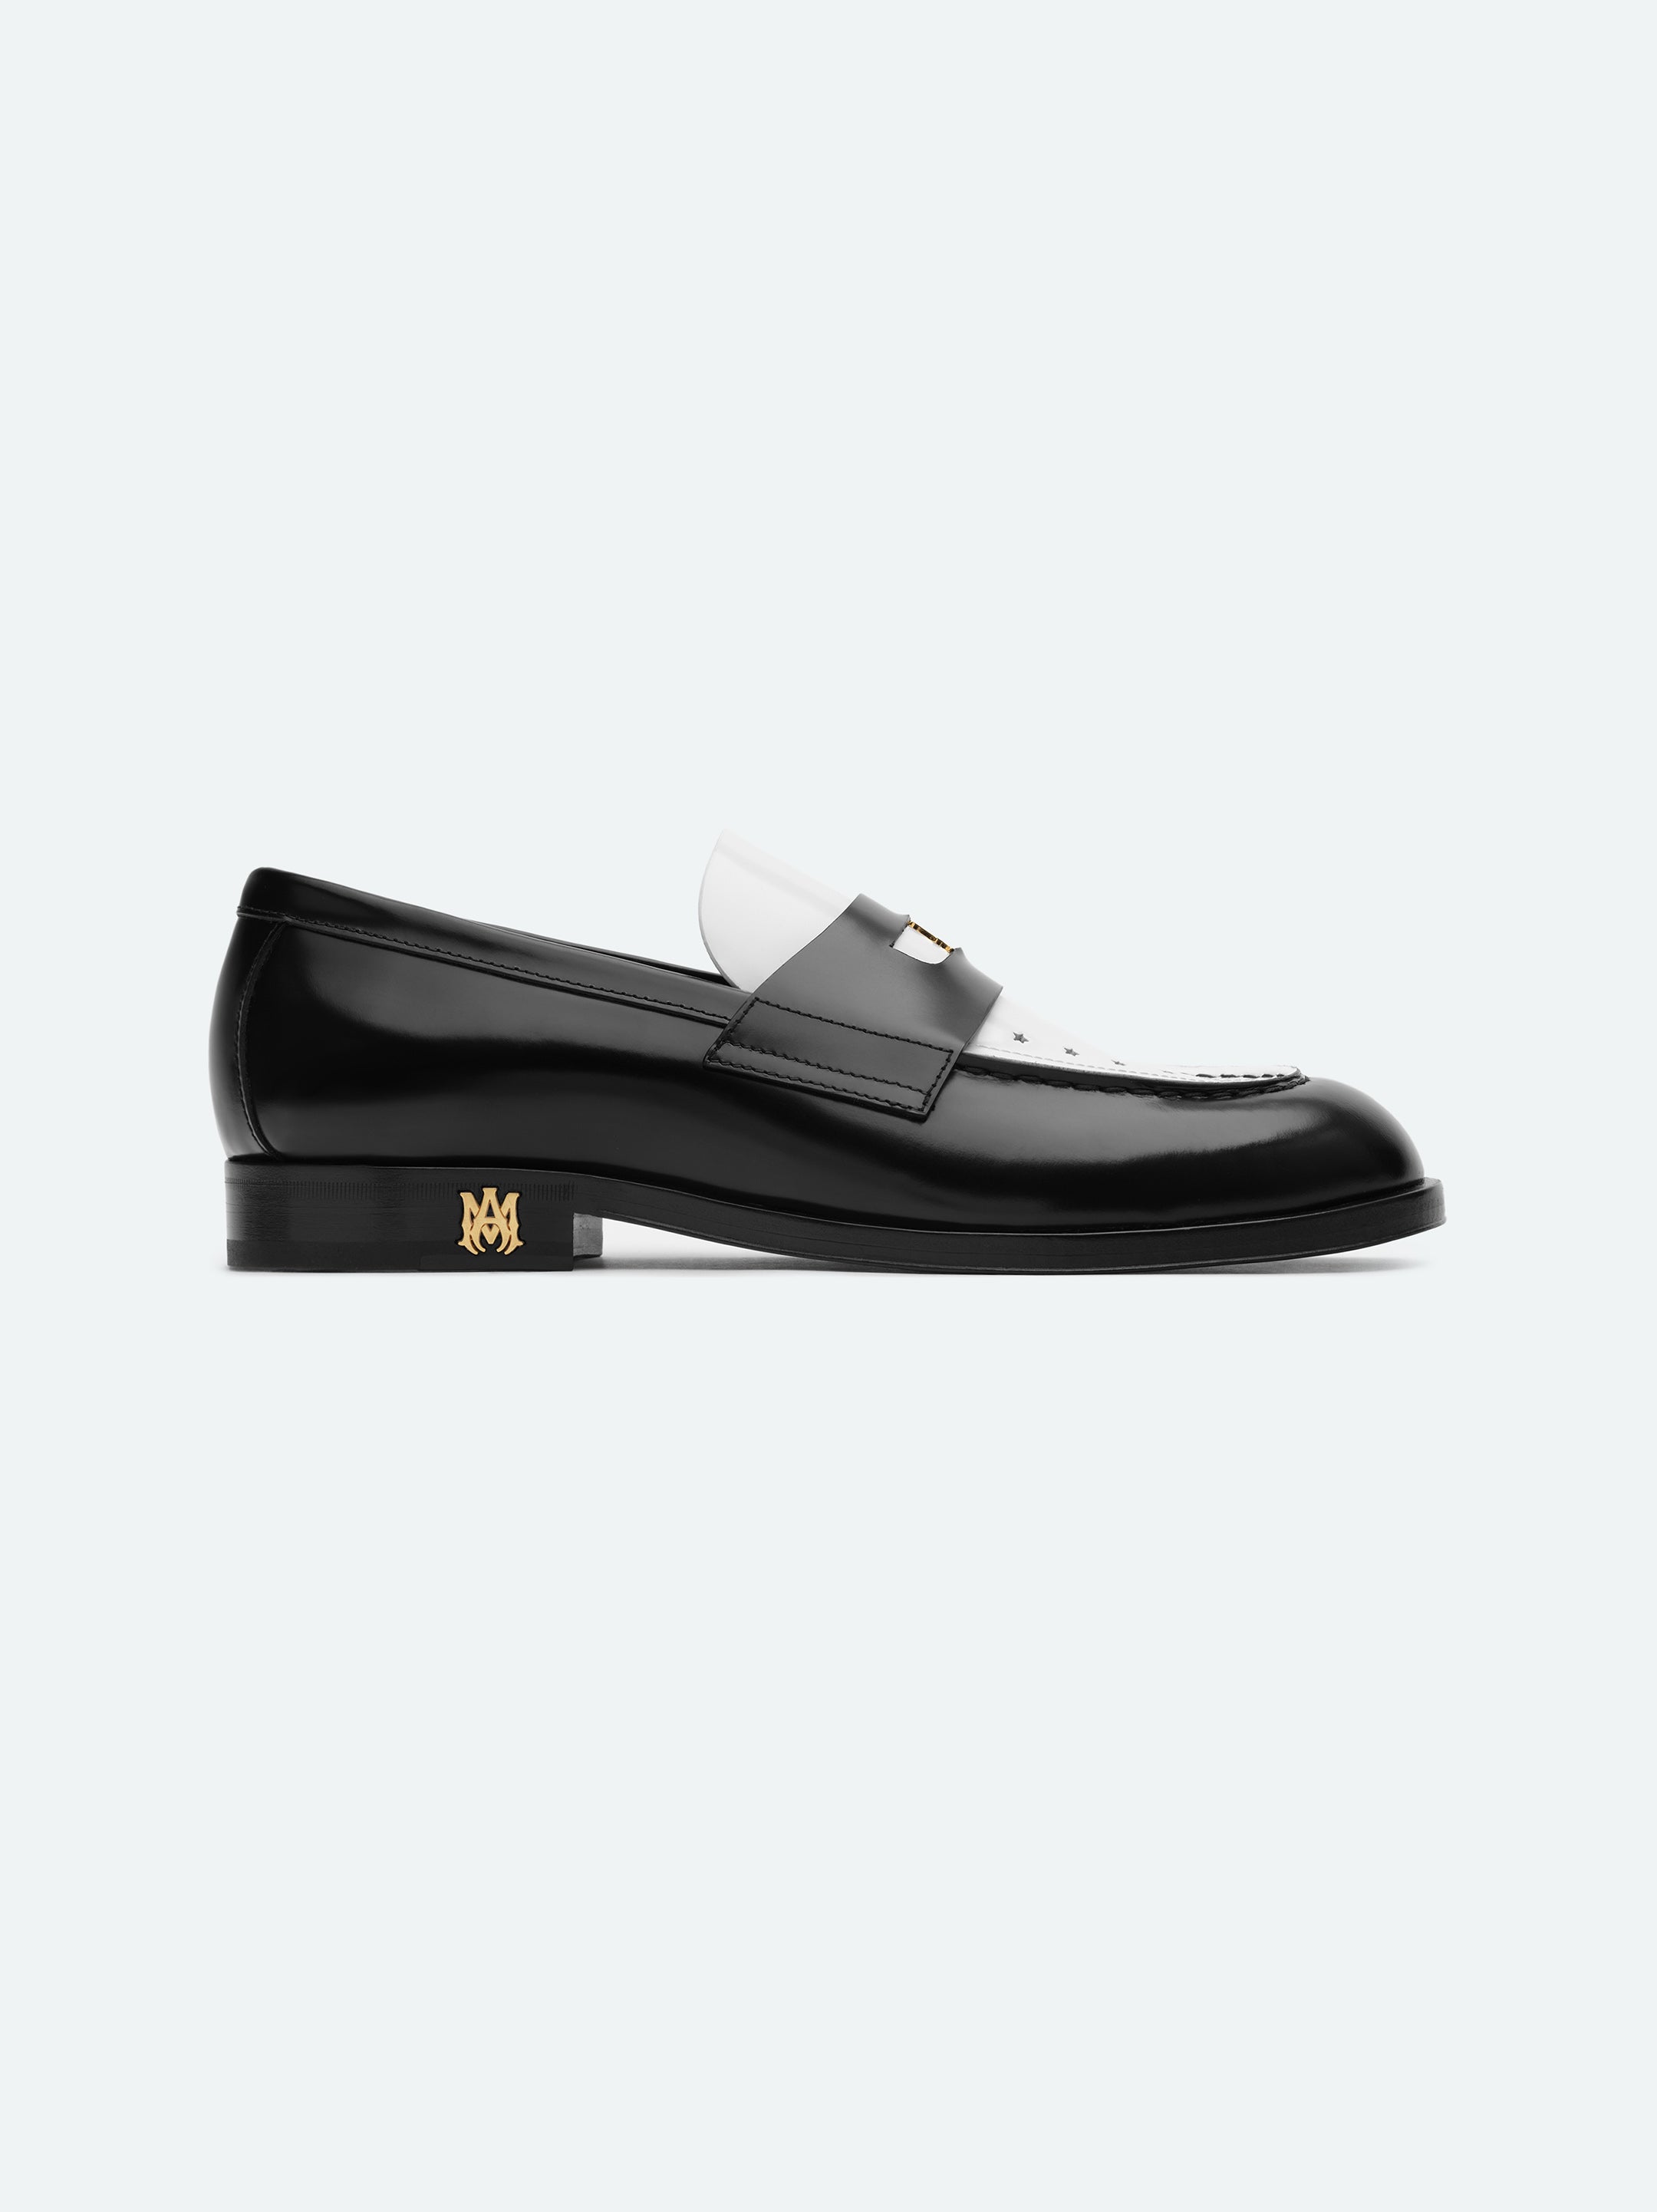 Product MA LOAFER - Black White featured image